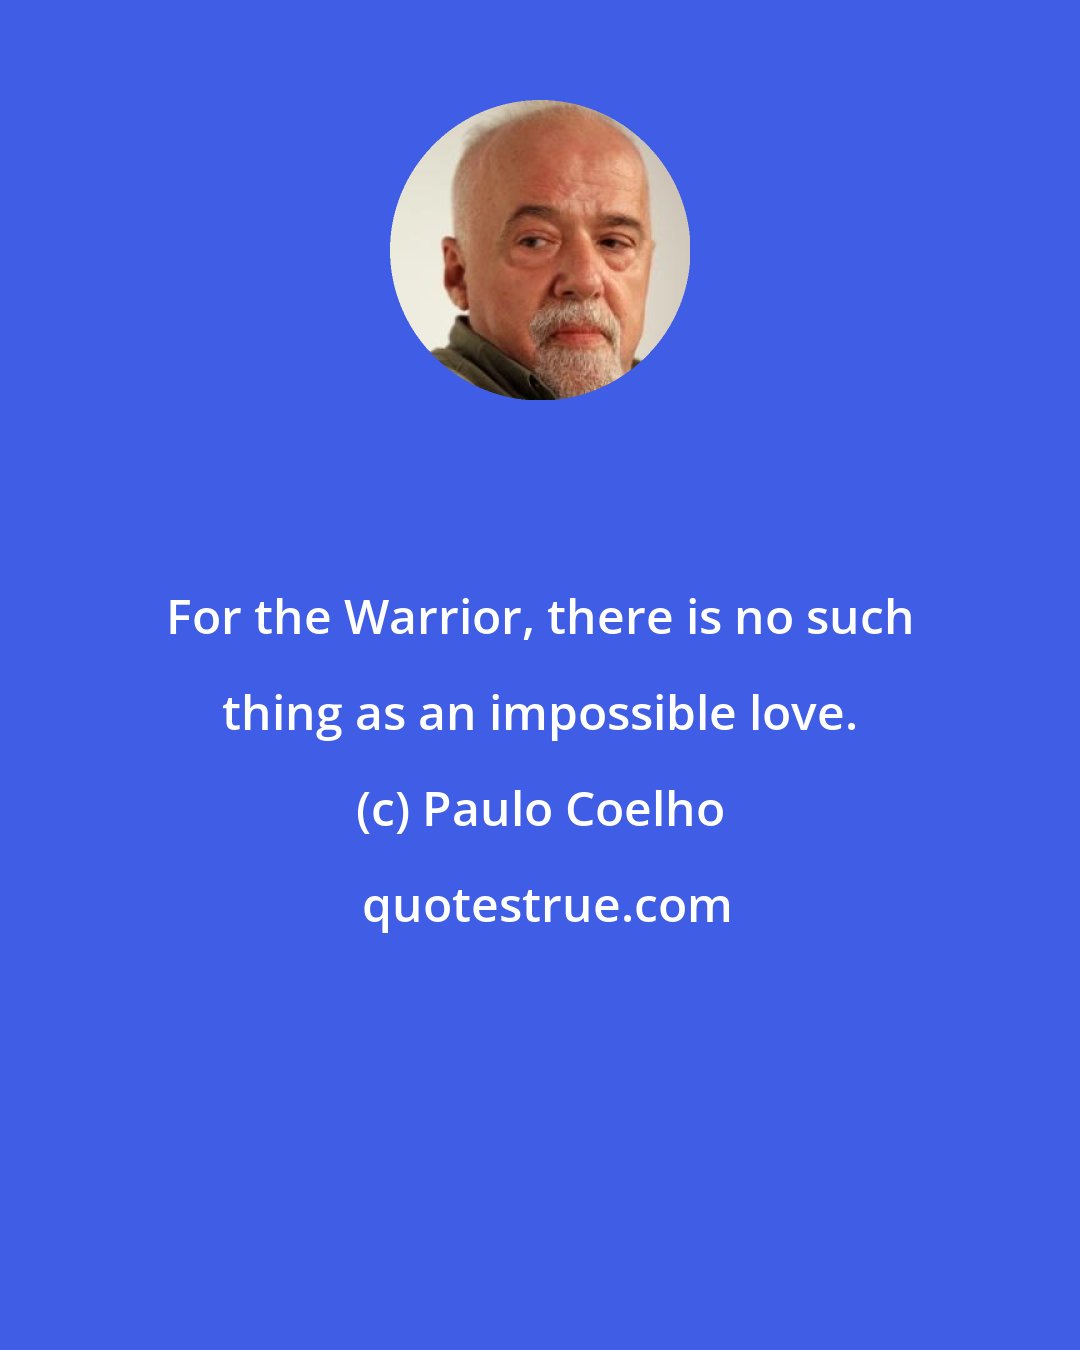 Paulo Coelho: For the Warrior, there is no such thing as an impossible love.